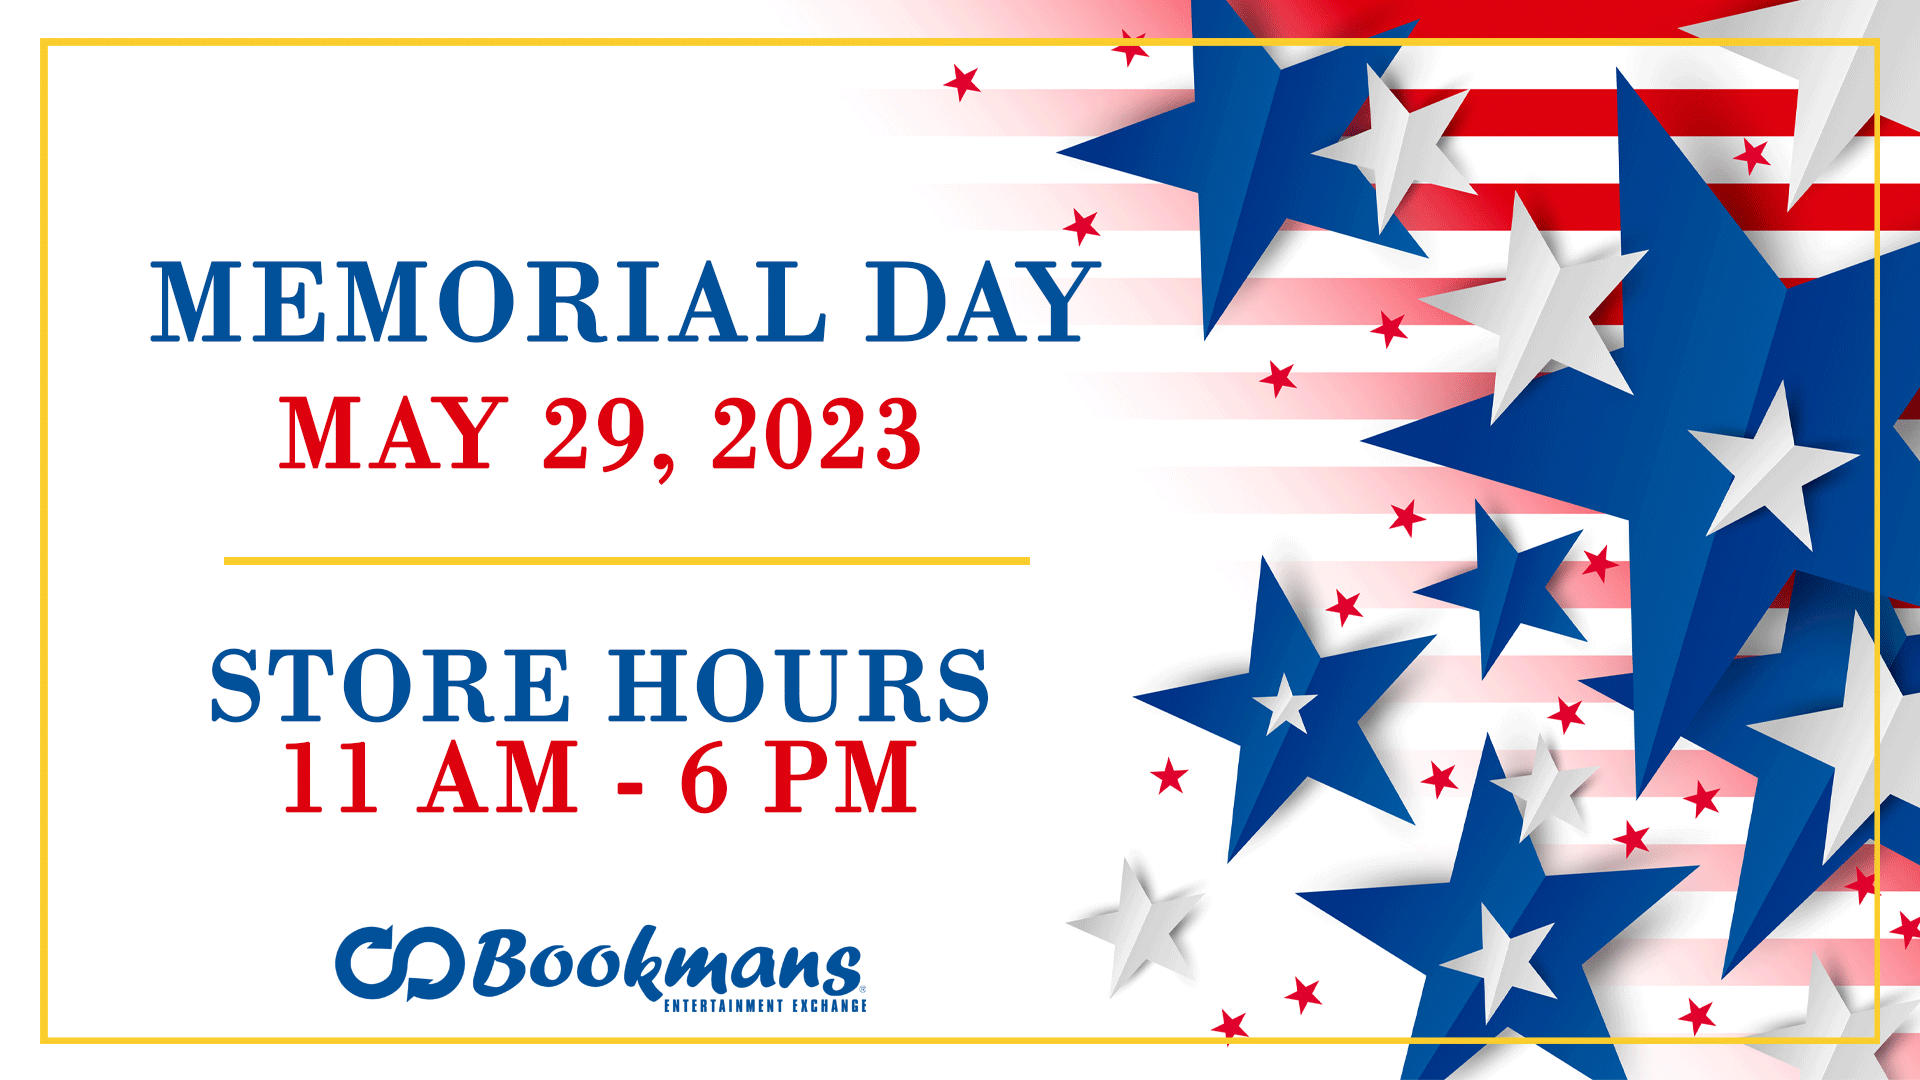 red white and blue stars and stripes background for memorial day. Bookmans memorial day store hours for Monday, May 29 are 11 AM to 6 PM